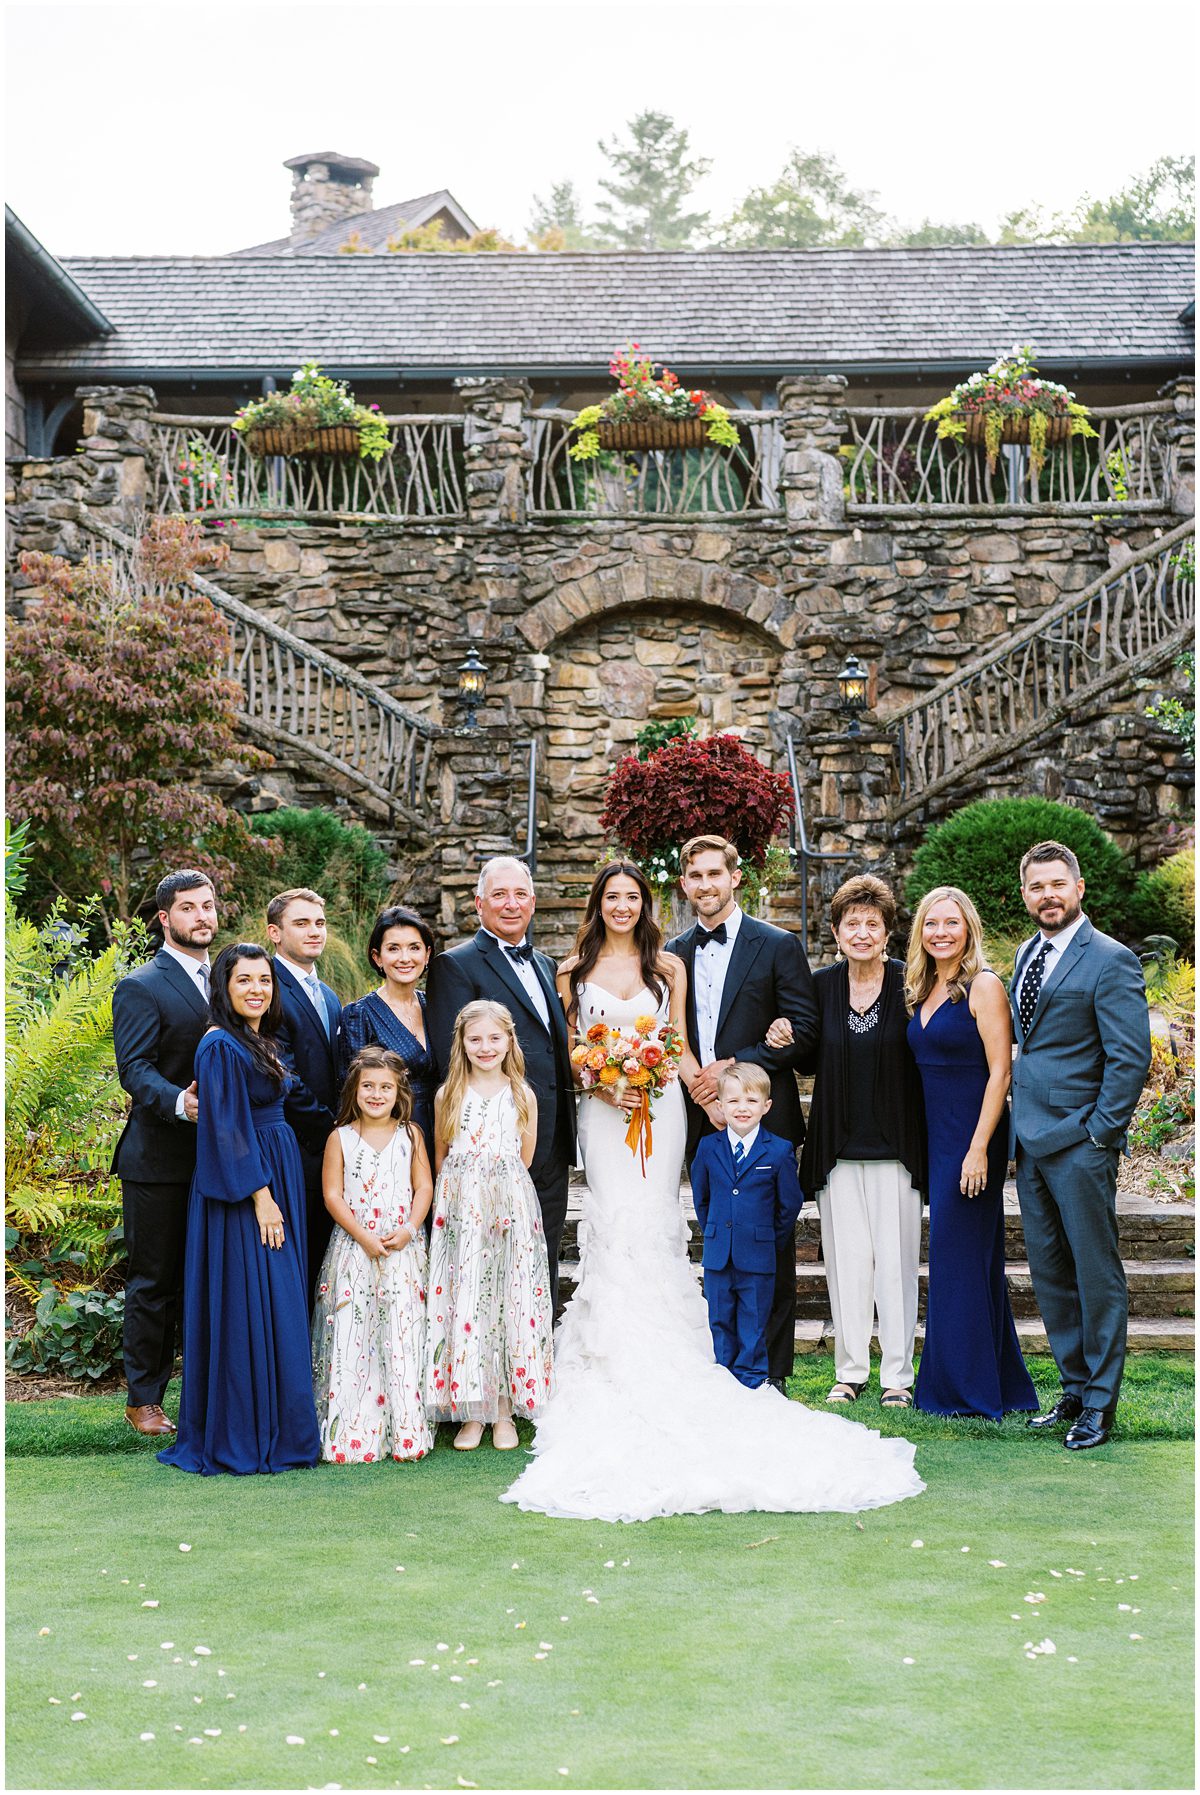 Family photo on the steps of the Mountaintop Golf and Lake Club after the wedding ceremony